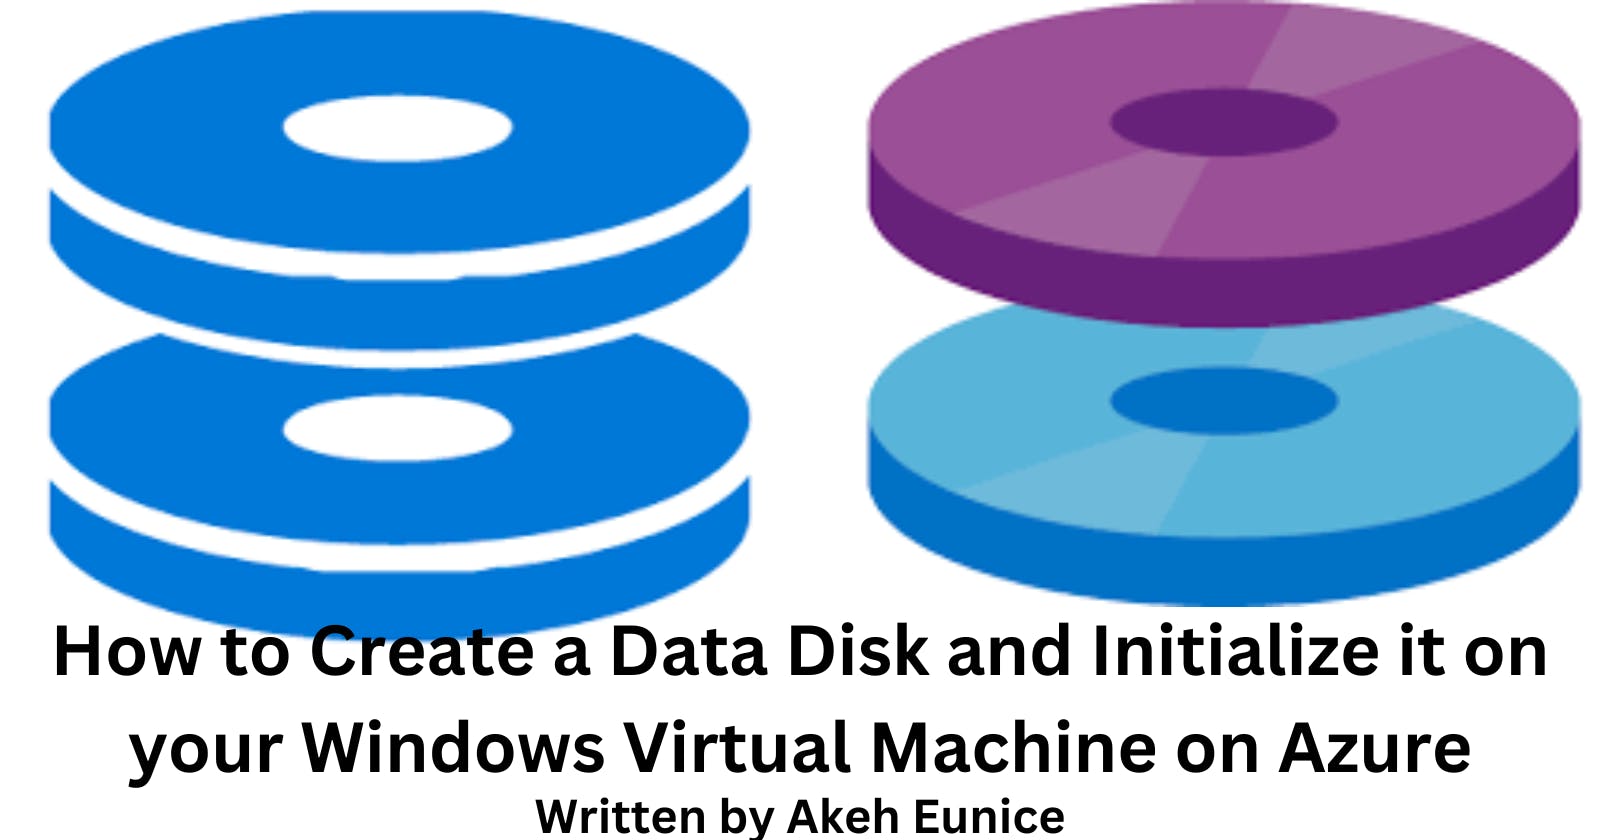 How to Extend a Data Disk and Initialize It on Your Windows Virtual Machine on Azure